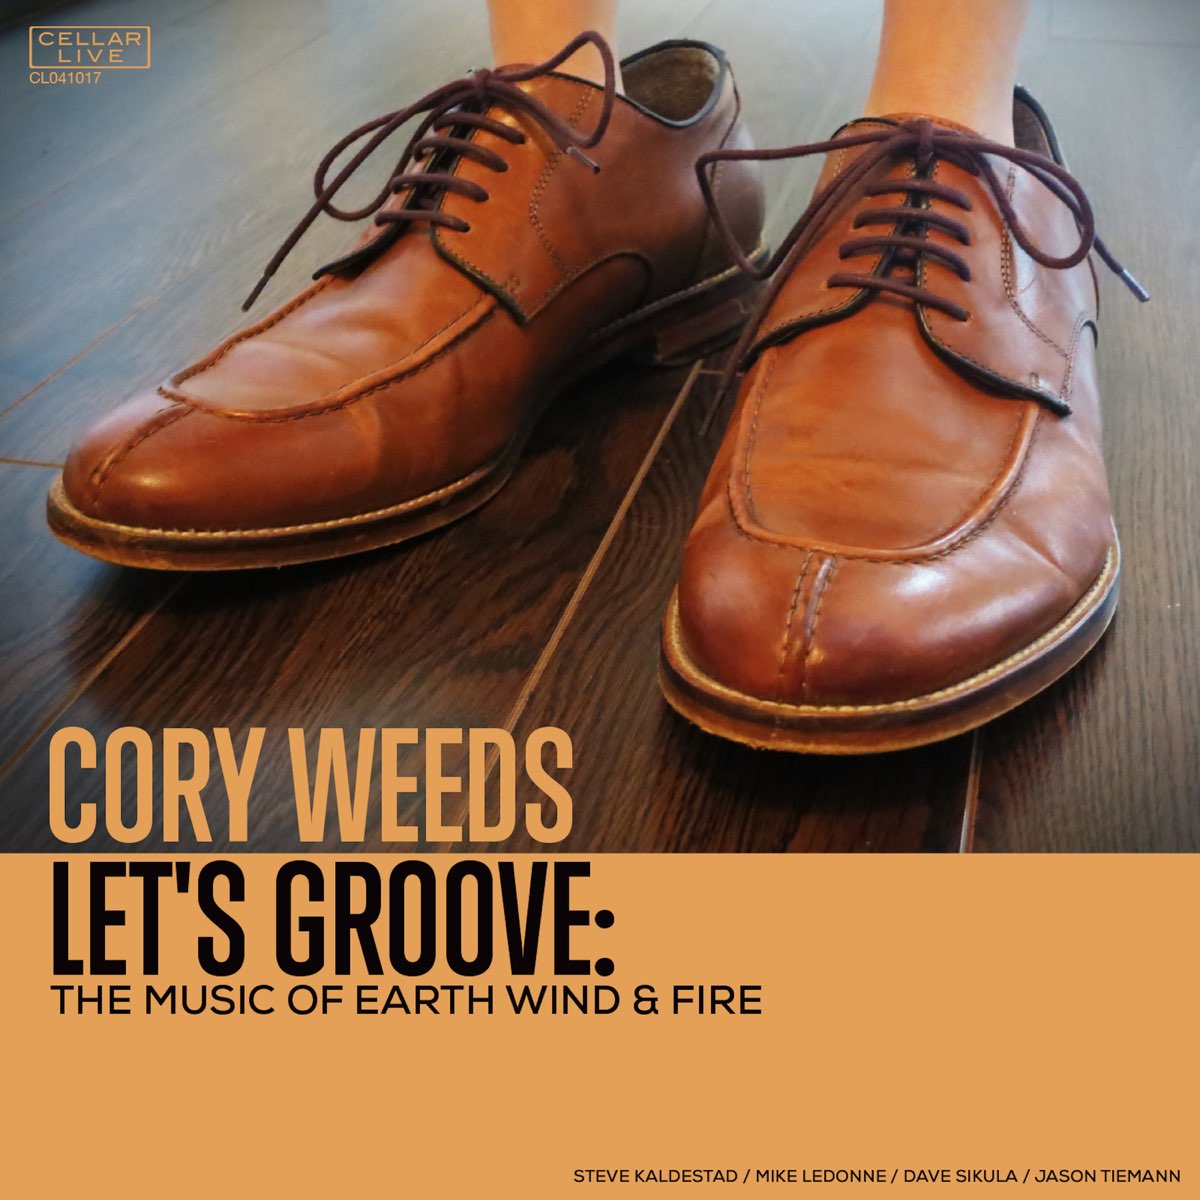 Lets me fire. Cory Weeds. Let's Groove Earth Wind Fire.